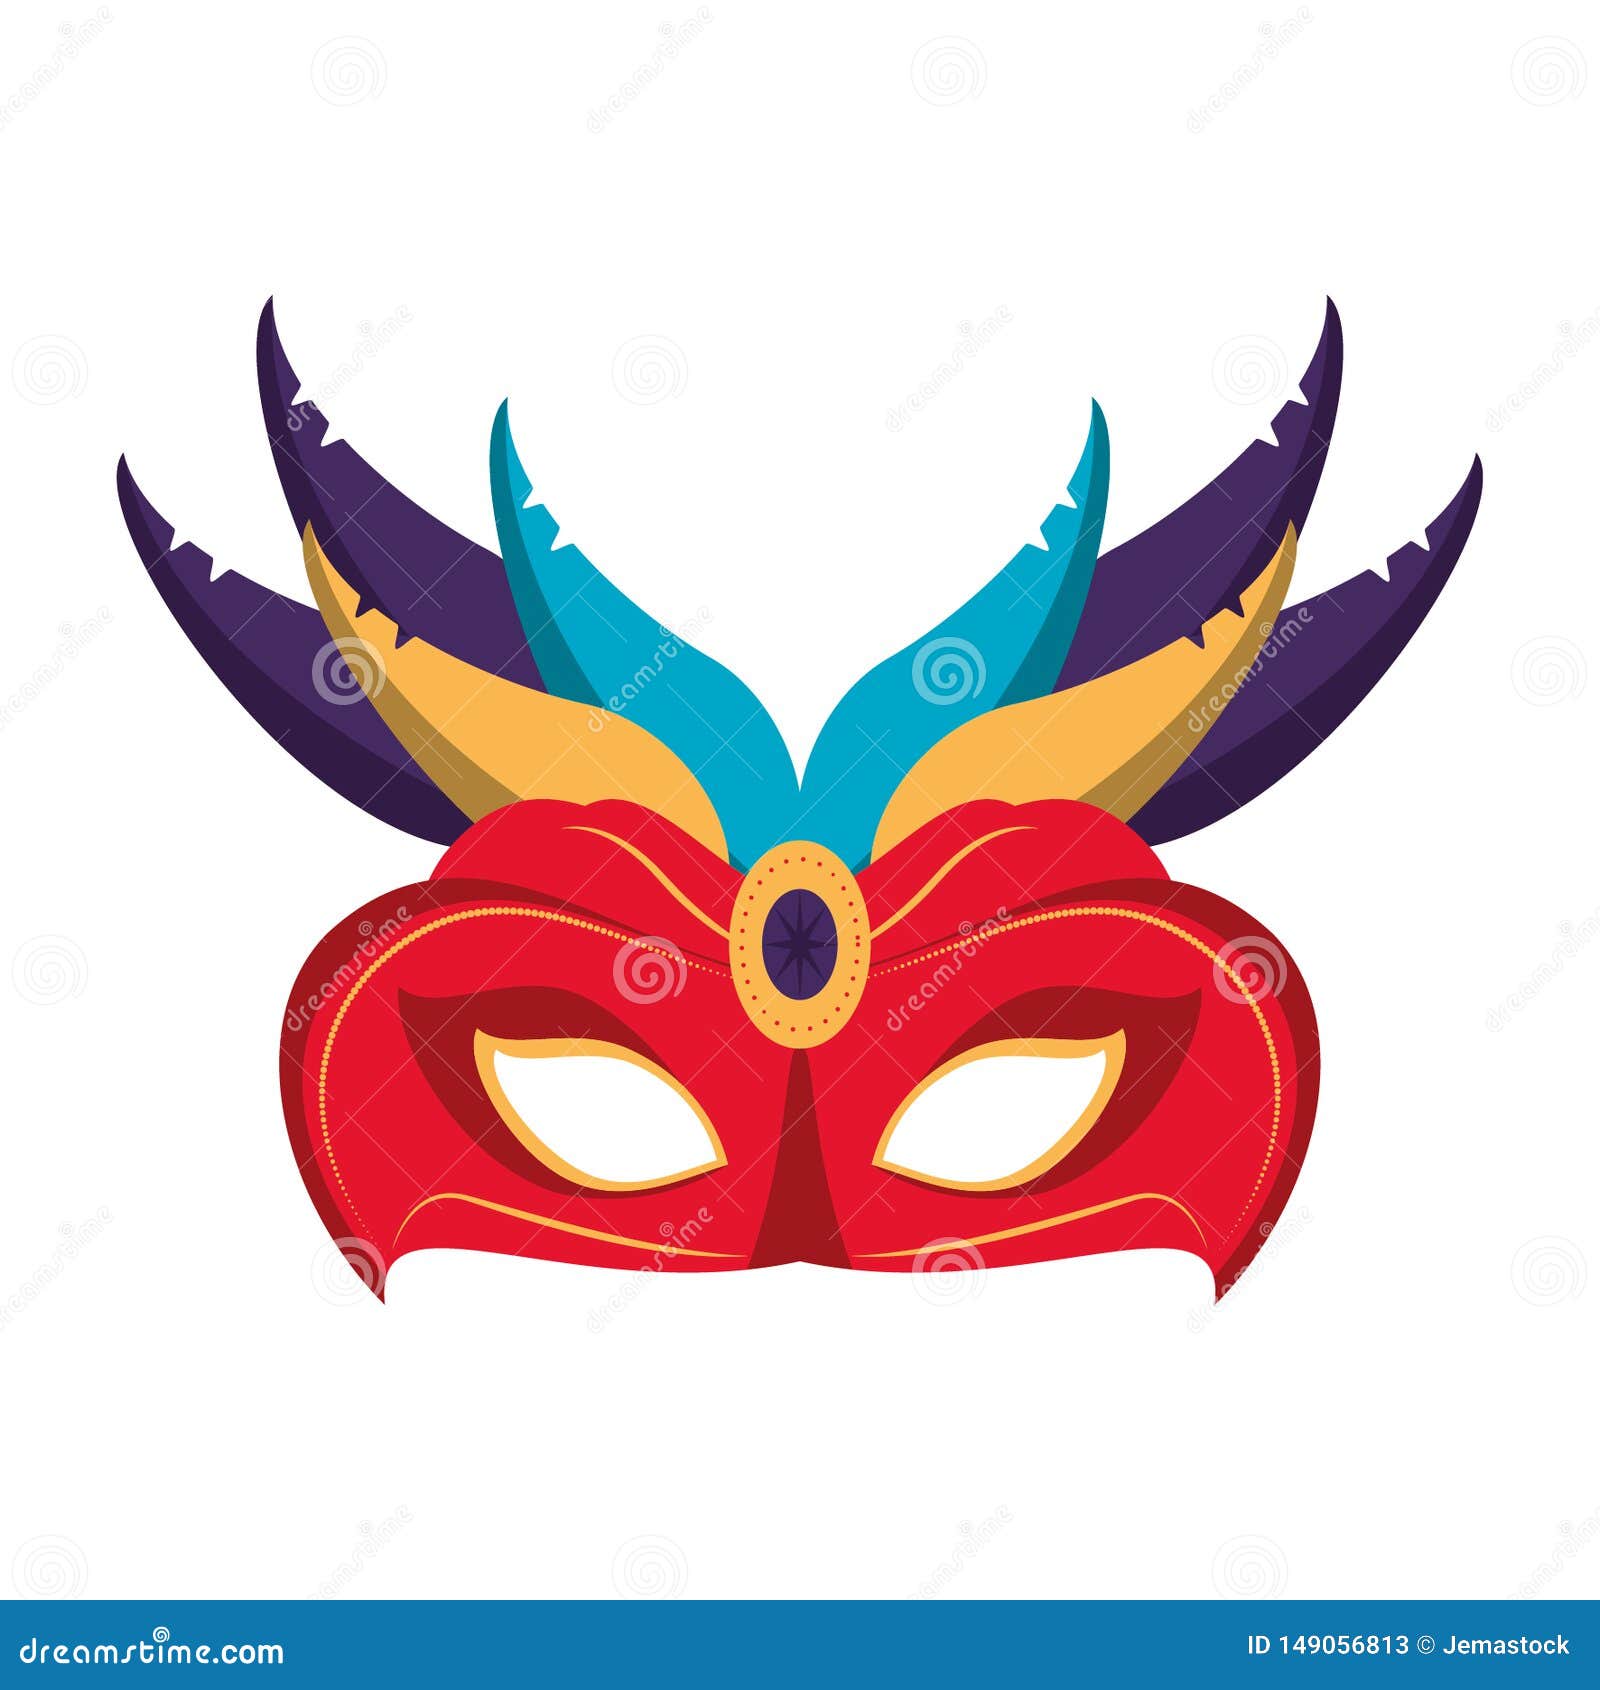 Festival Mask with Feathers Stock Vector - Illustration of masquerade,  party: 149056813